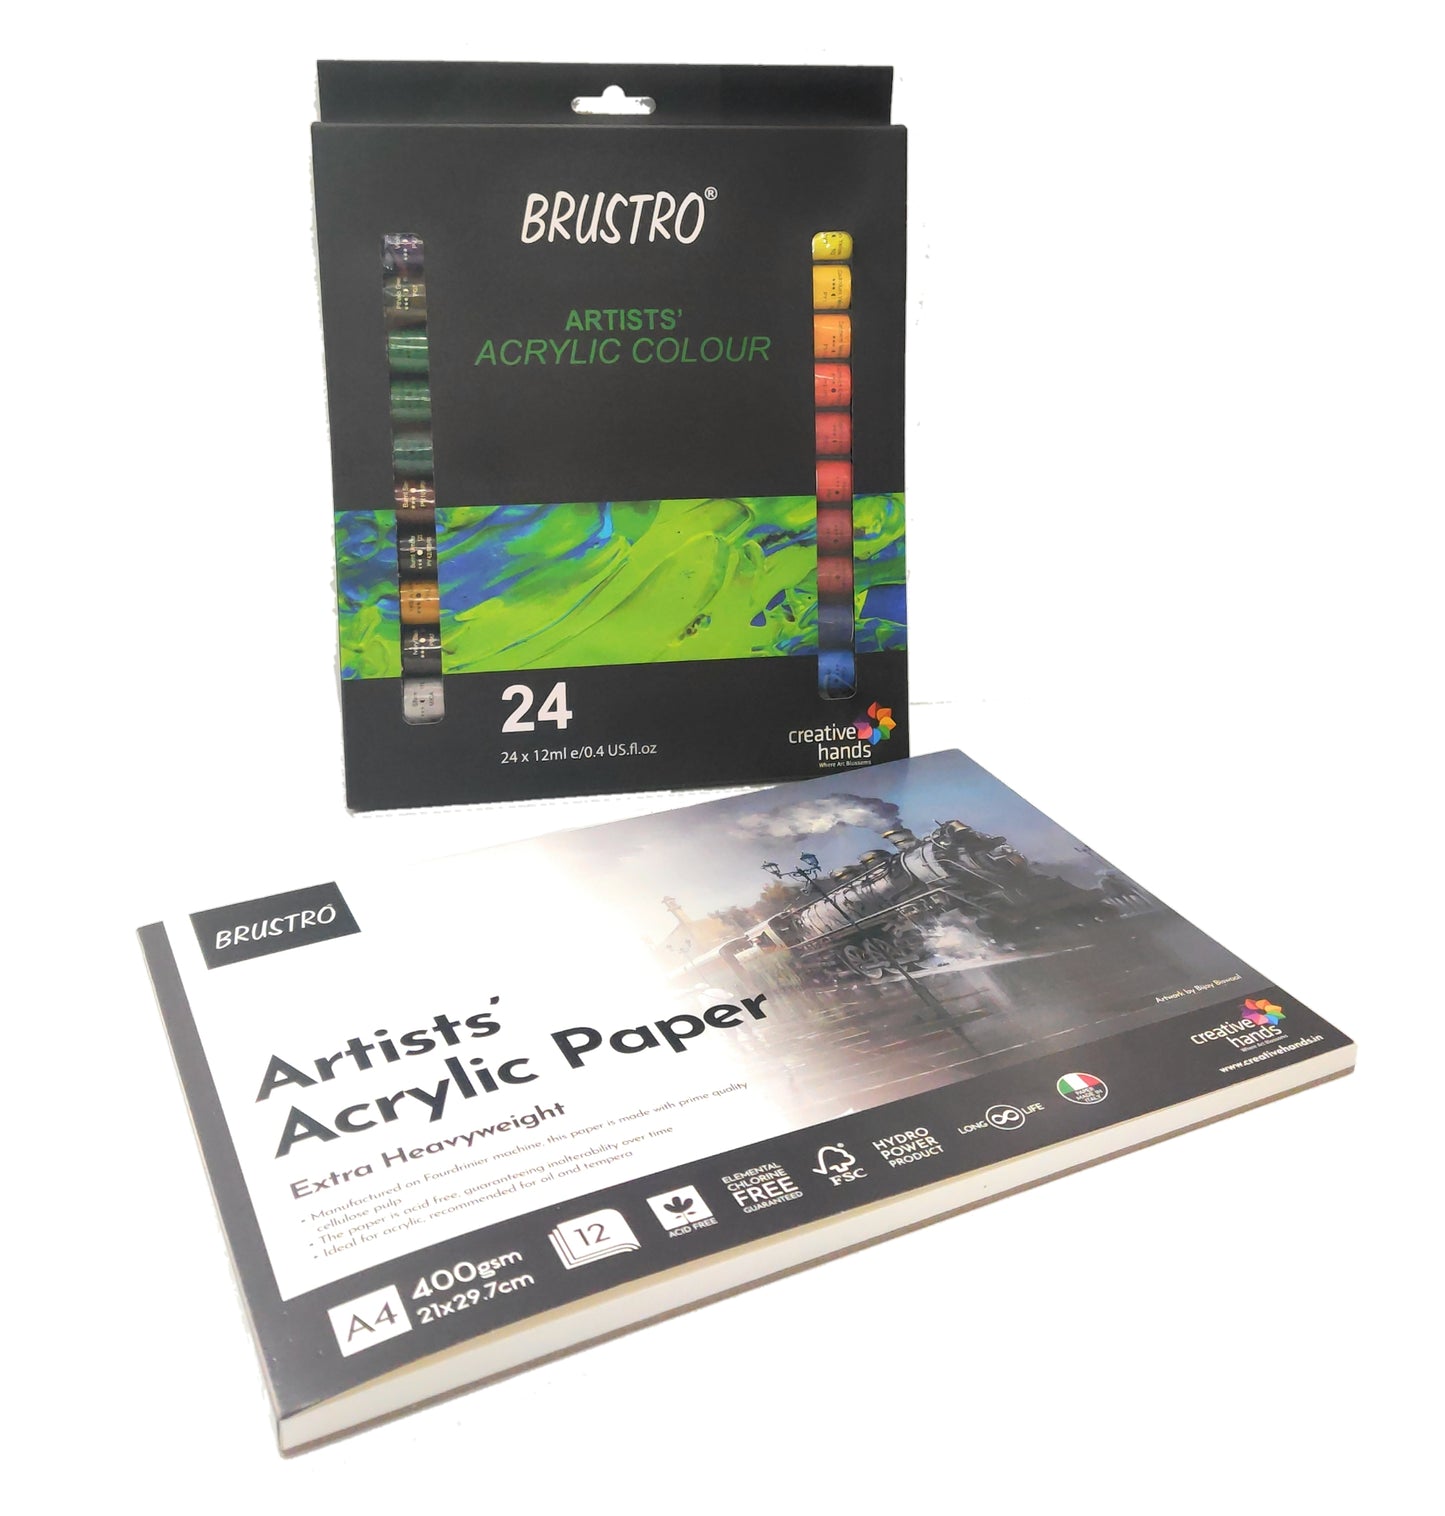 BRUSTRO Artists ’ Acrylic Colour Set of 24 Colours X 12ML Tubes with Artists Acrylic Glued Pad 400 GSM, A4-12 Sheets